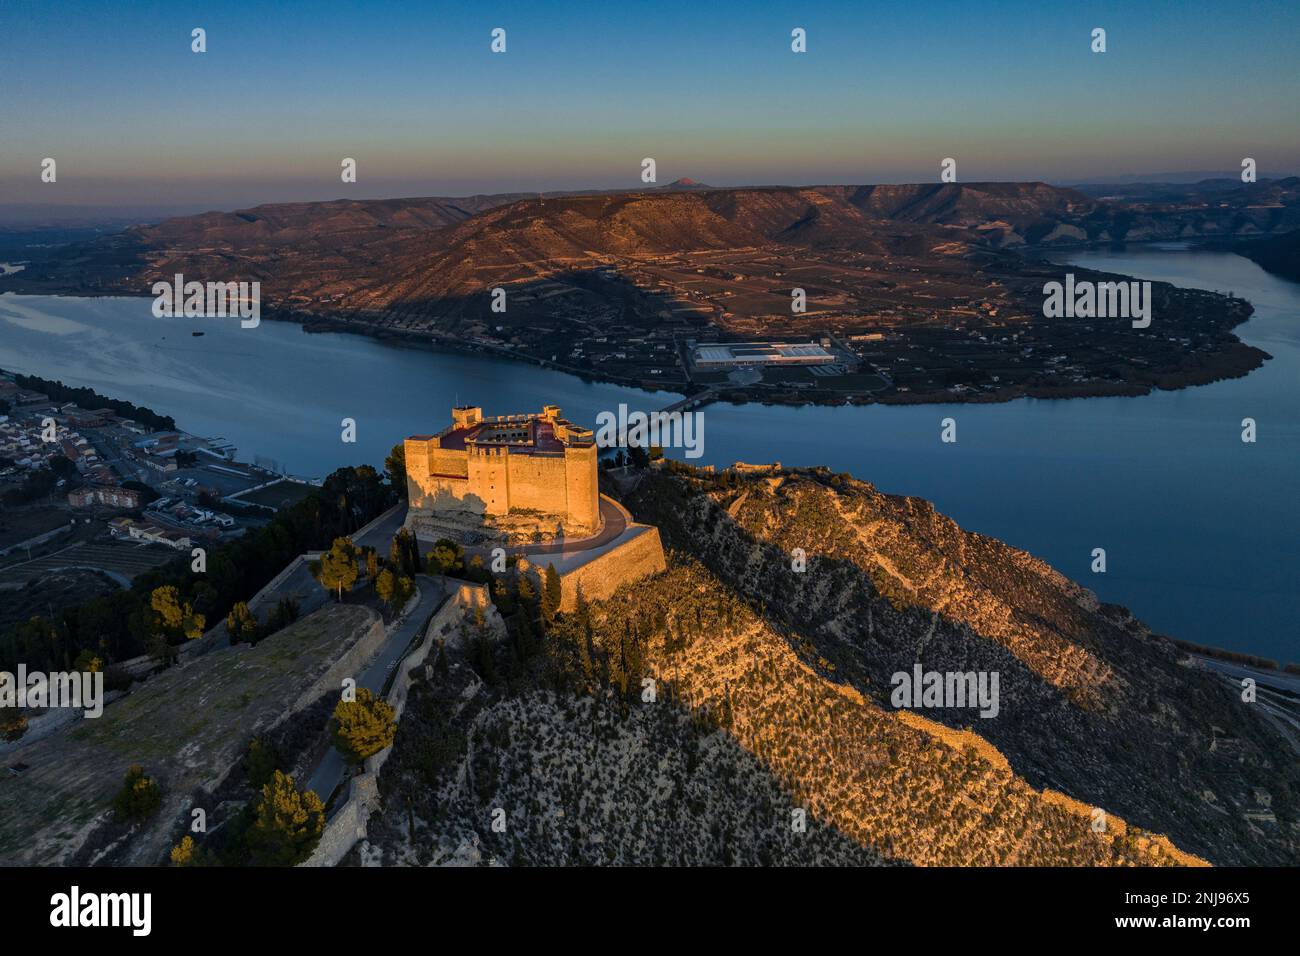 Aerial view of the castle of Mequinenza at the confluence of the Segre and Ebro rivers in a winter sunset (Bajo Cinca, Zaragoza, Aragon, Spain) Stock Photo